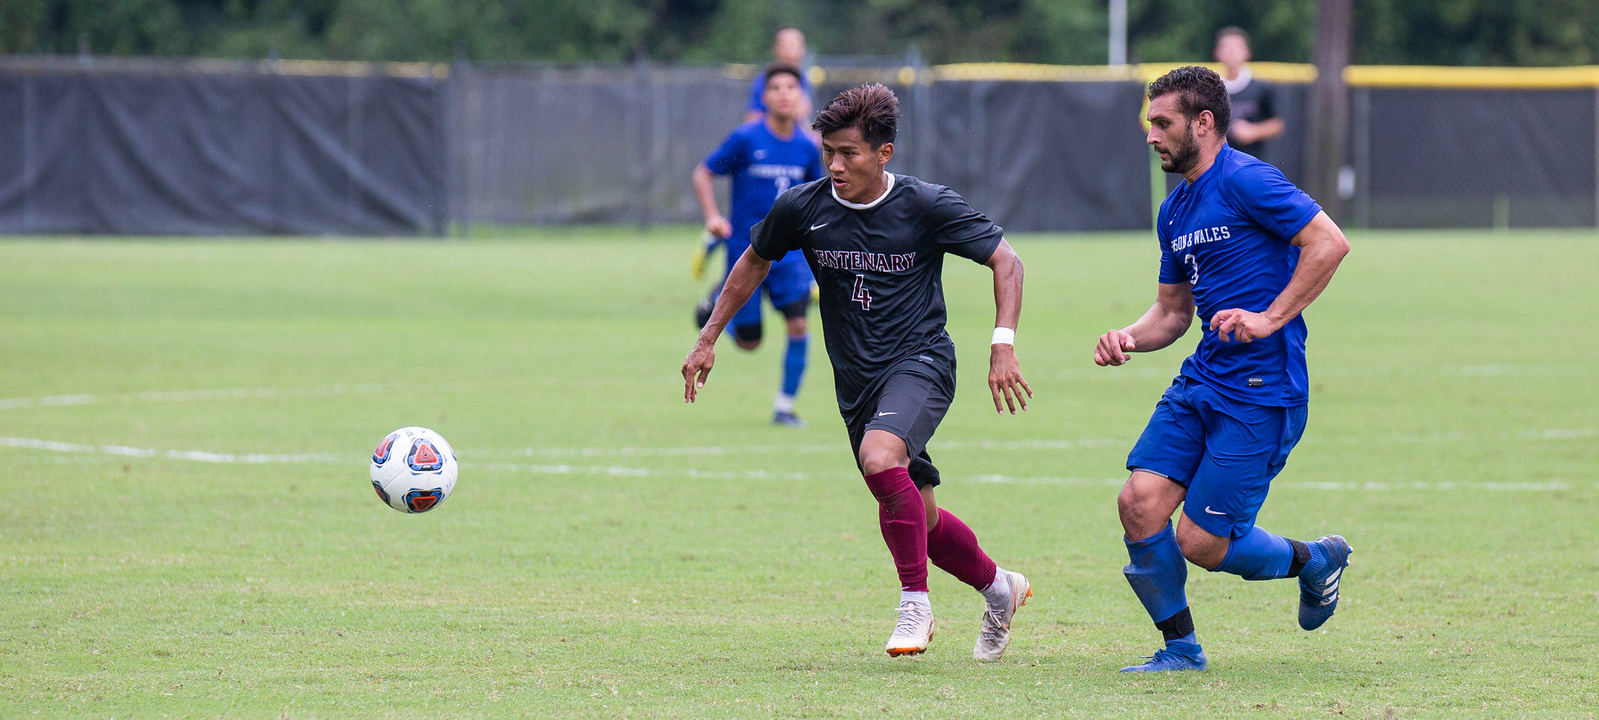 Men's Soccer Welcomes Hendrix to Town for Tuesday Match